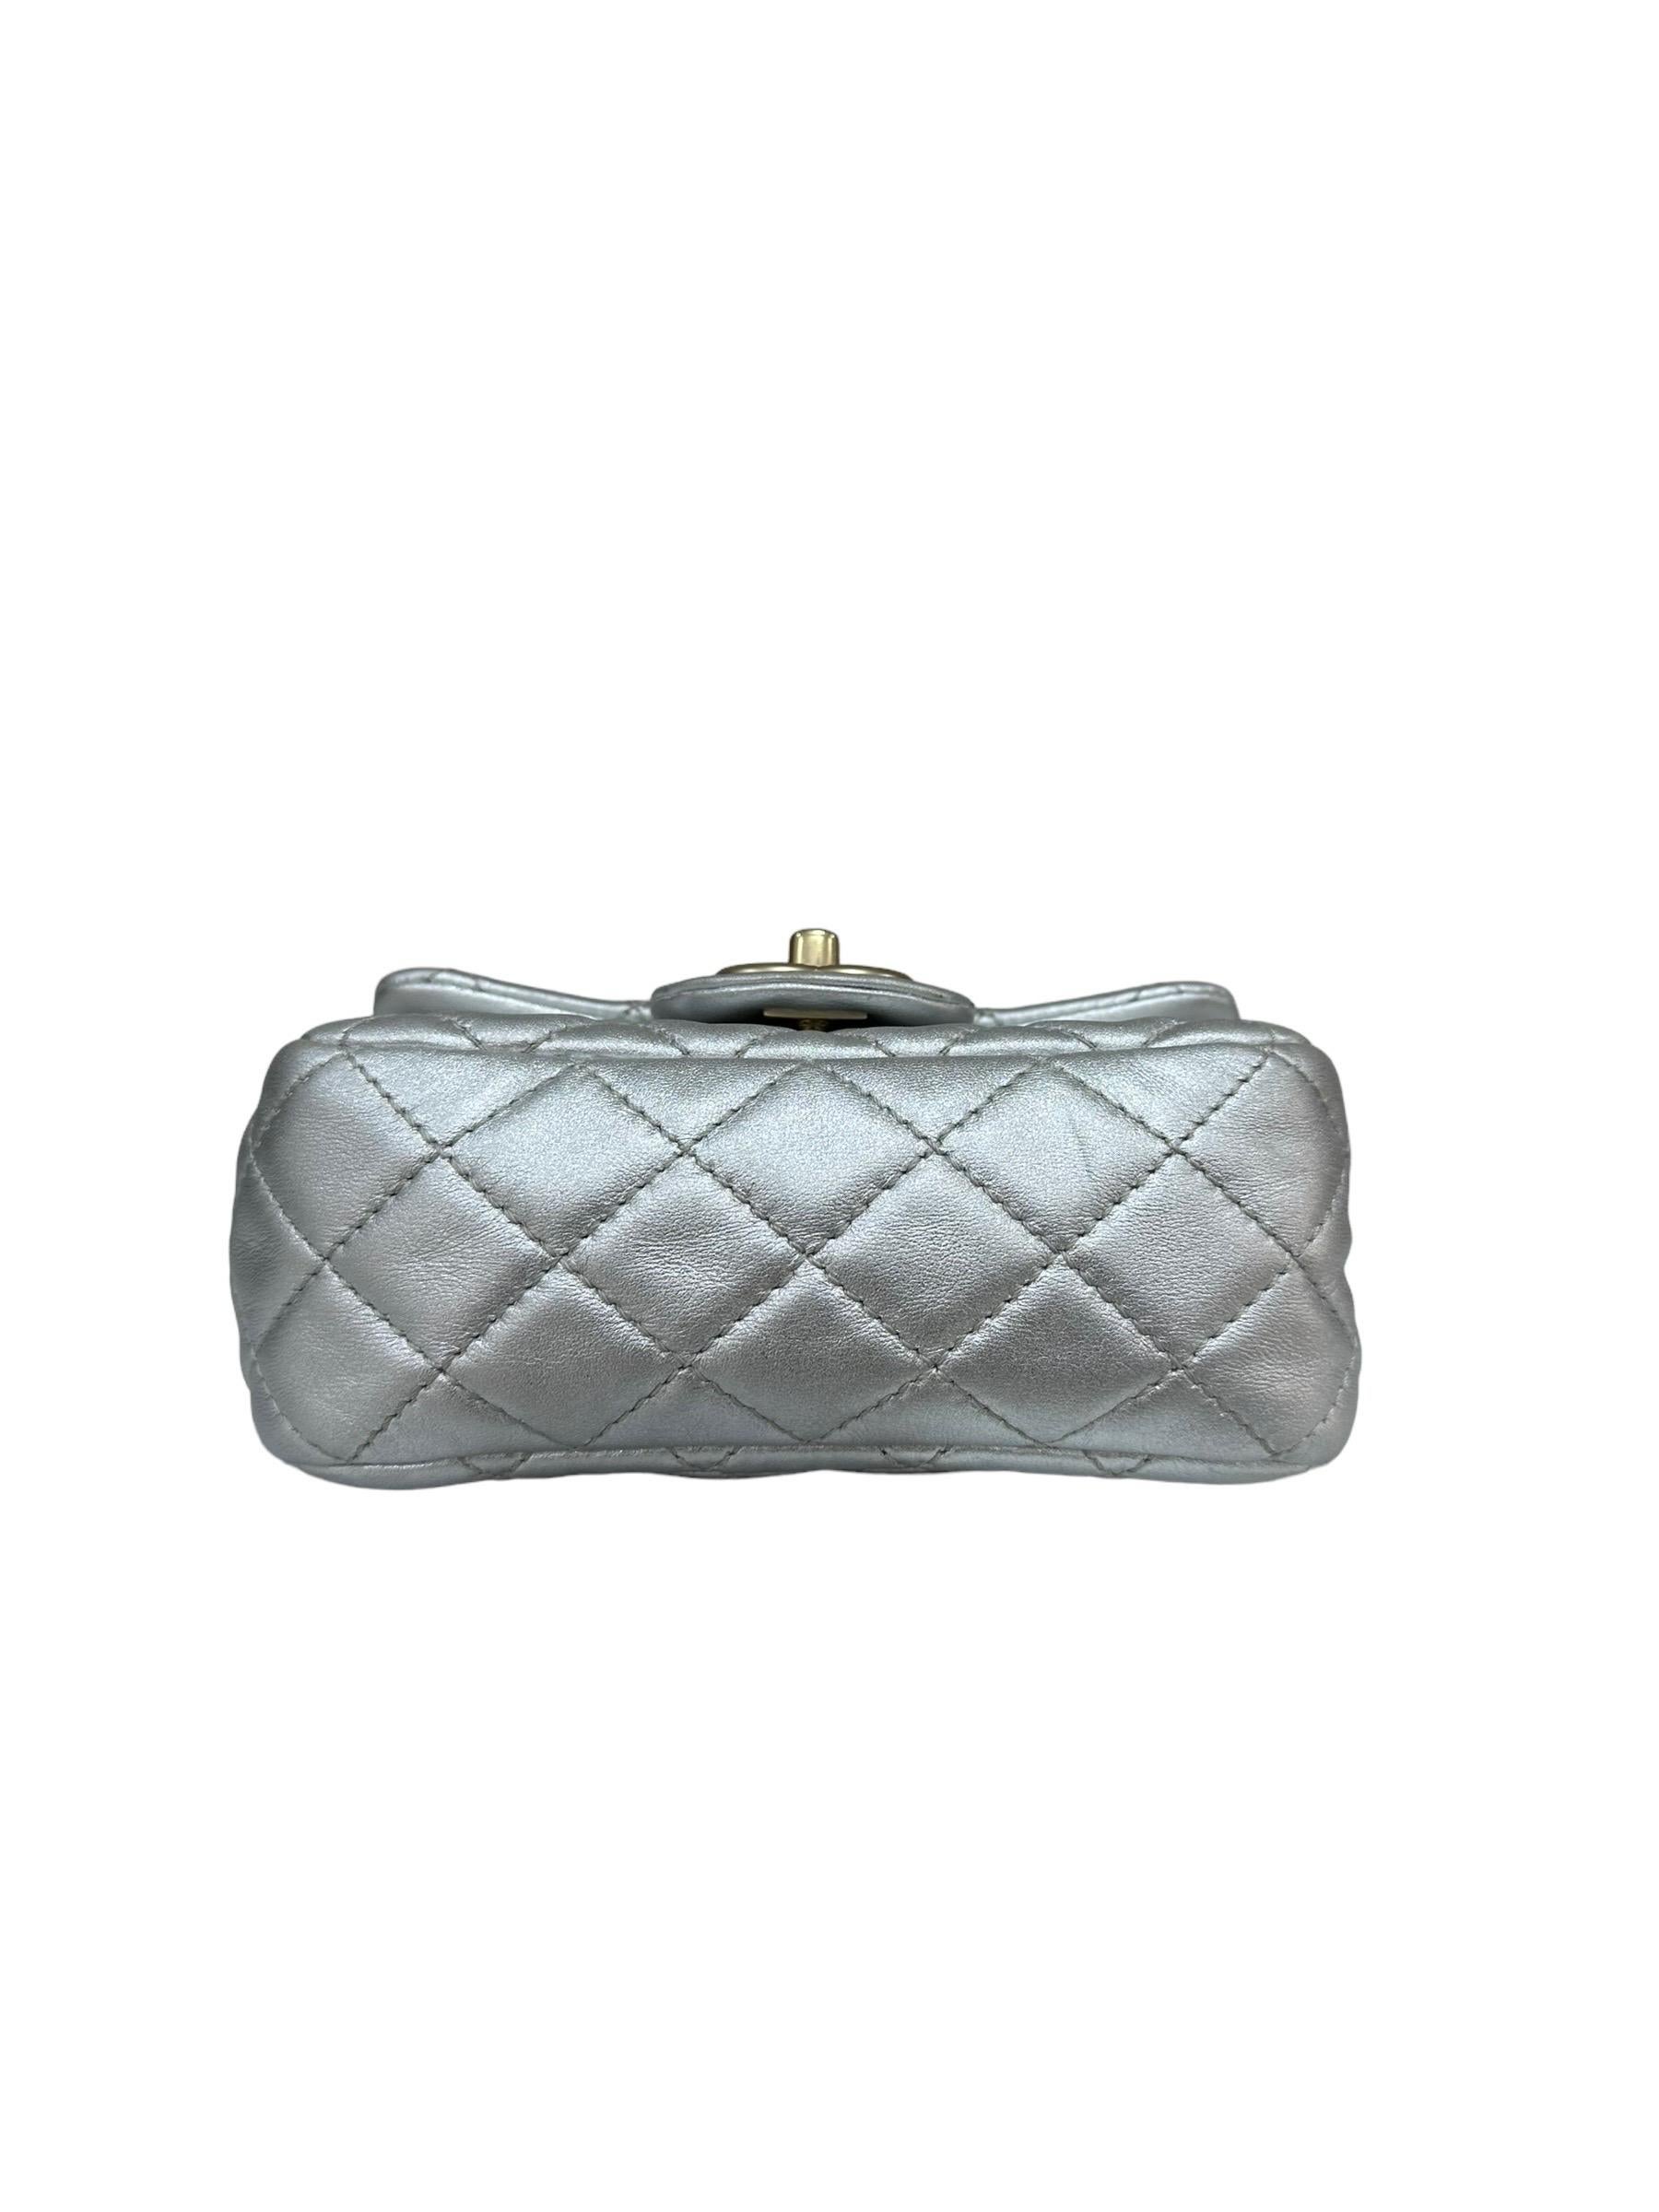 2009 Chanel Timeless Mini Flap Silver Leather  3